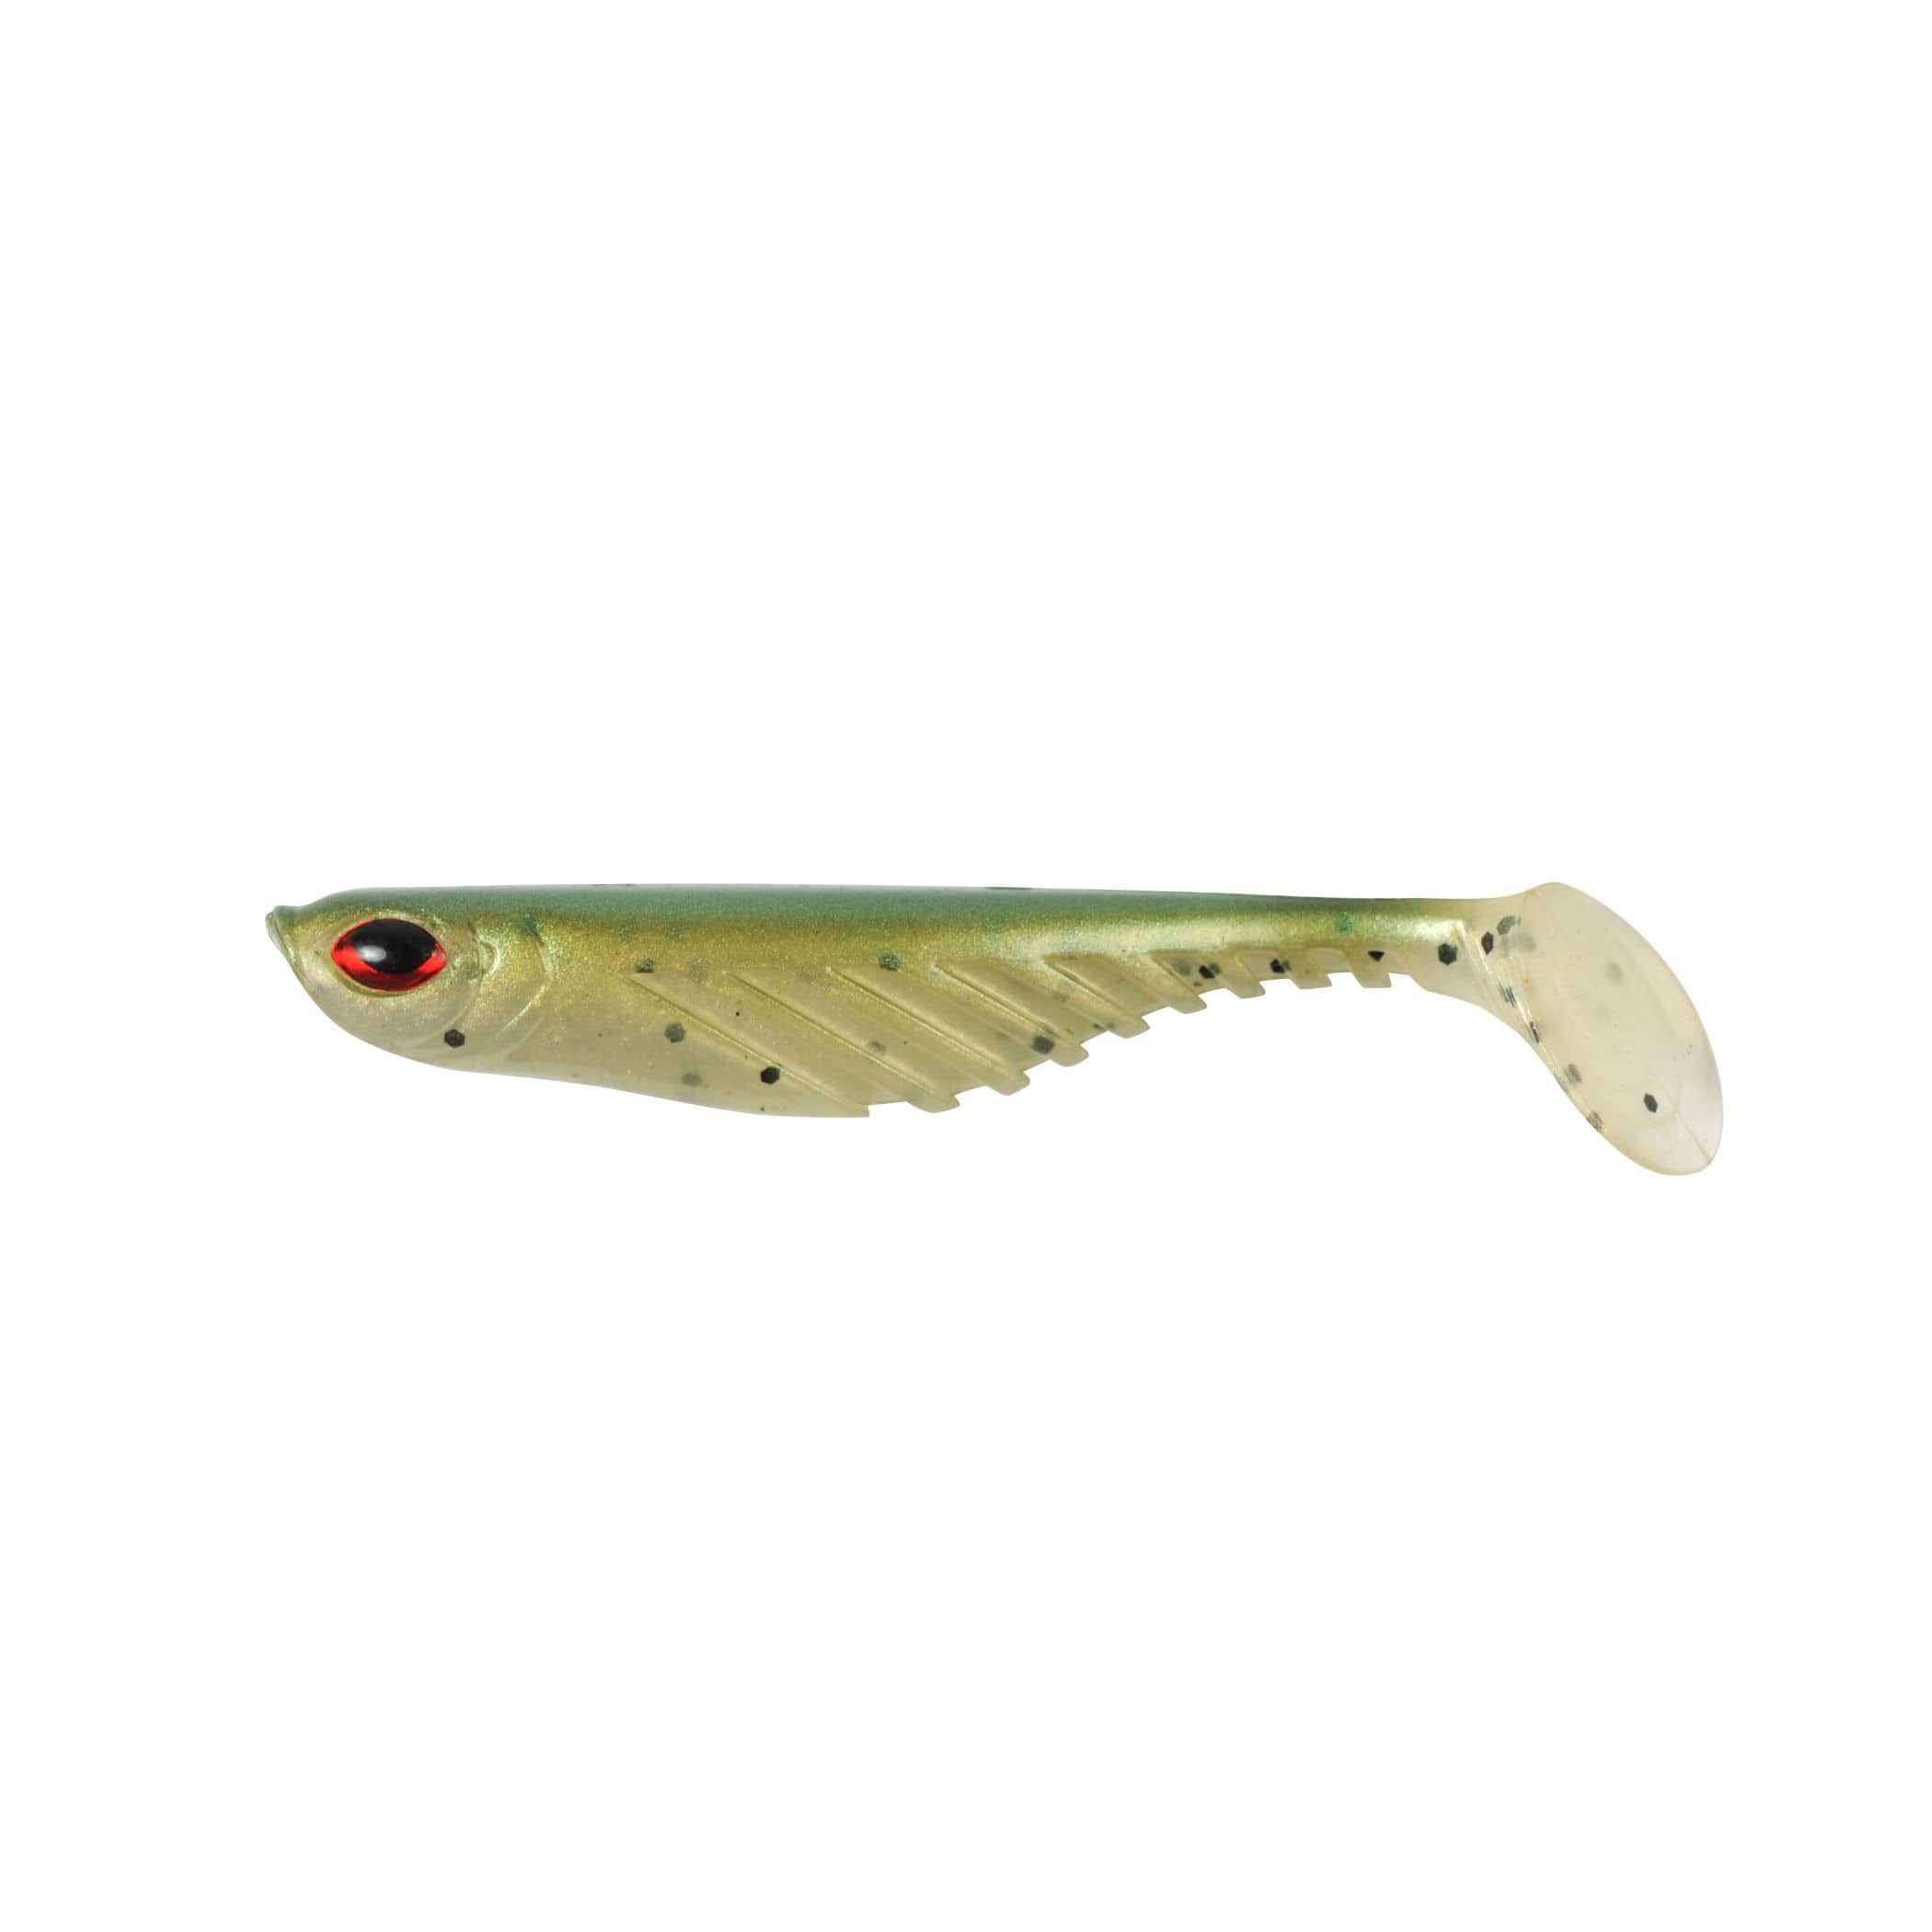 6 pcs “Ghost” Super Minnow swimbait fishing lures- 4 inches – Super Lures  USA